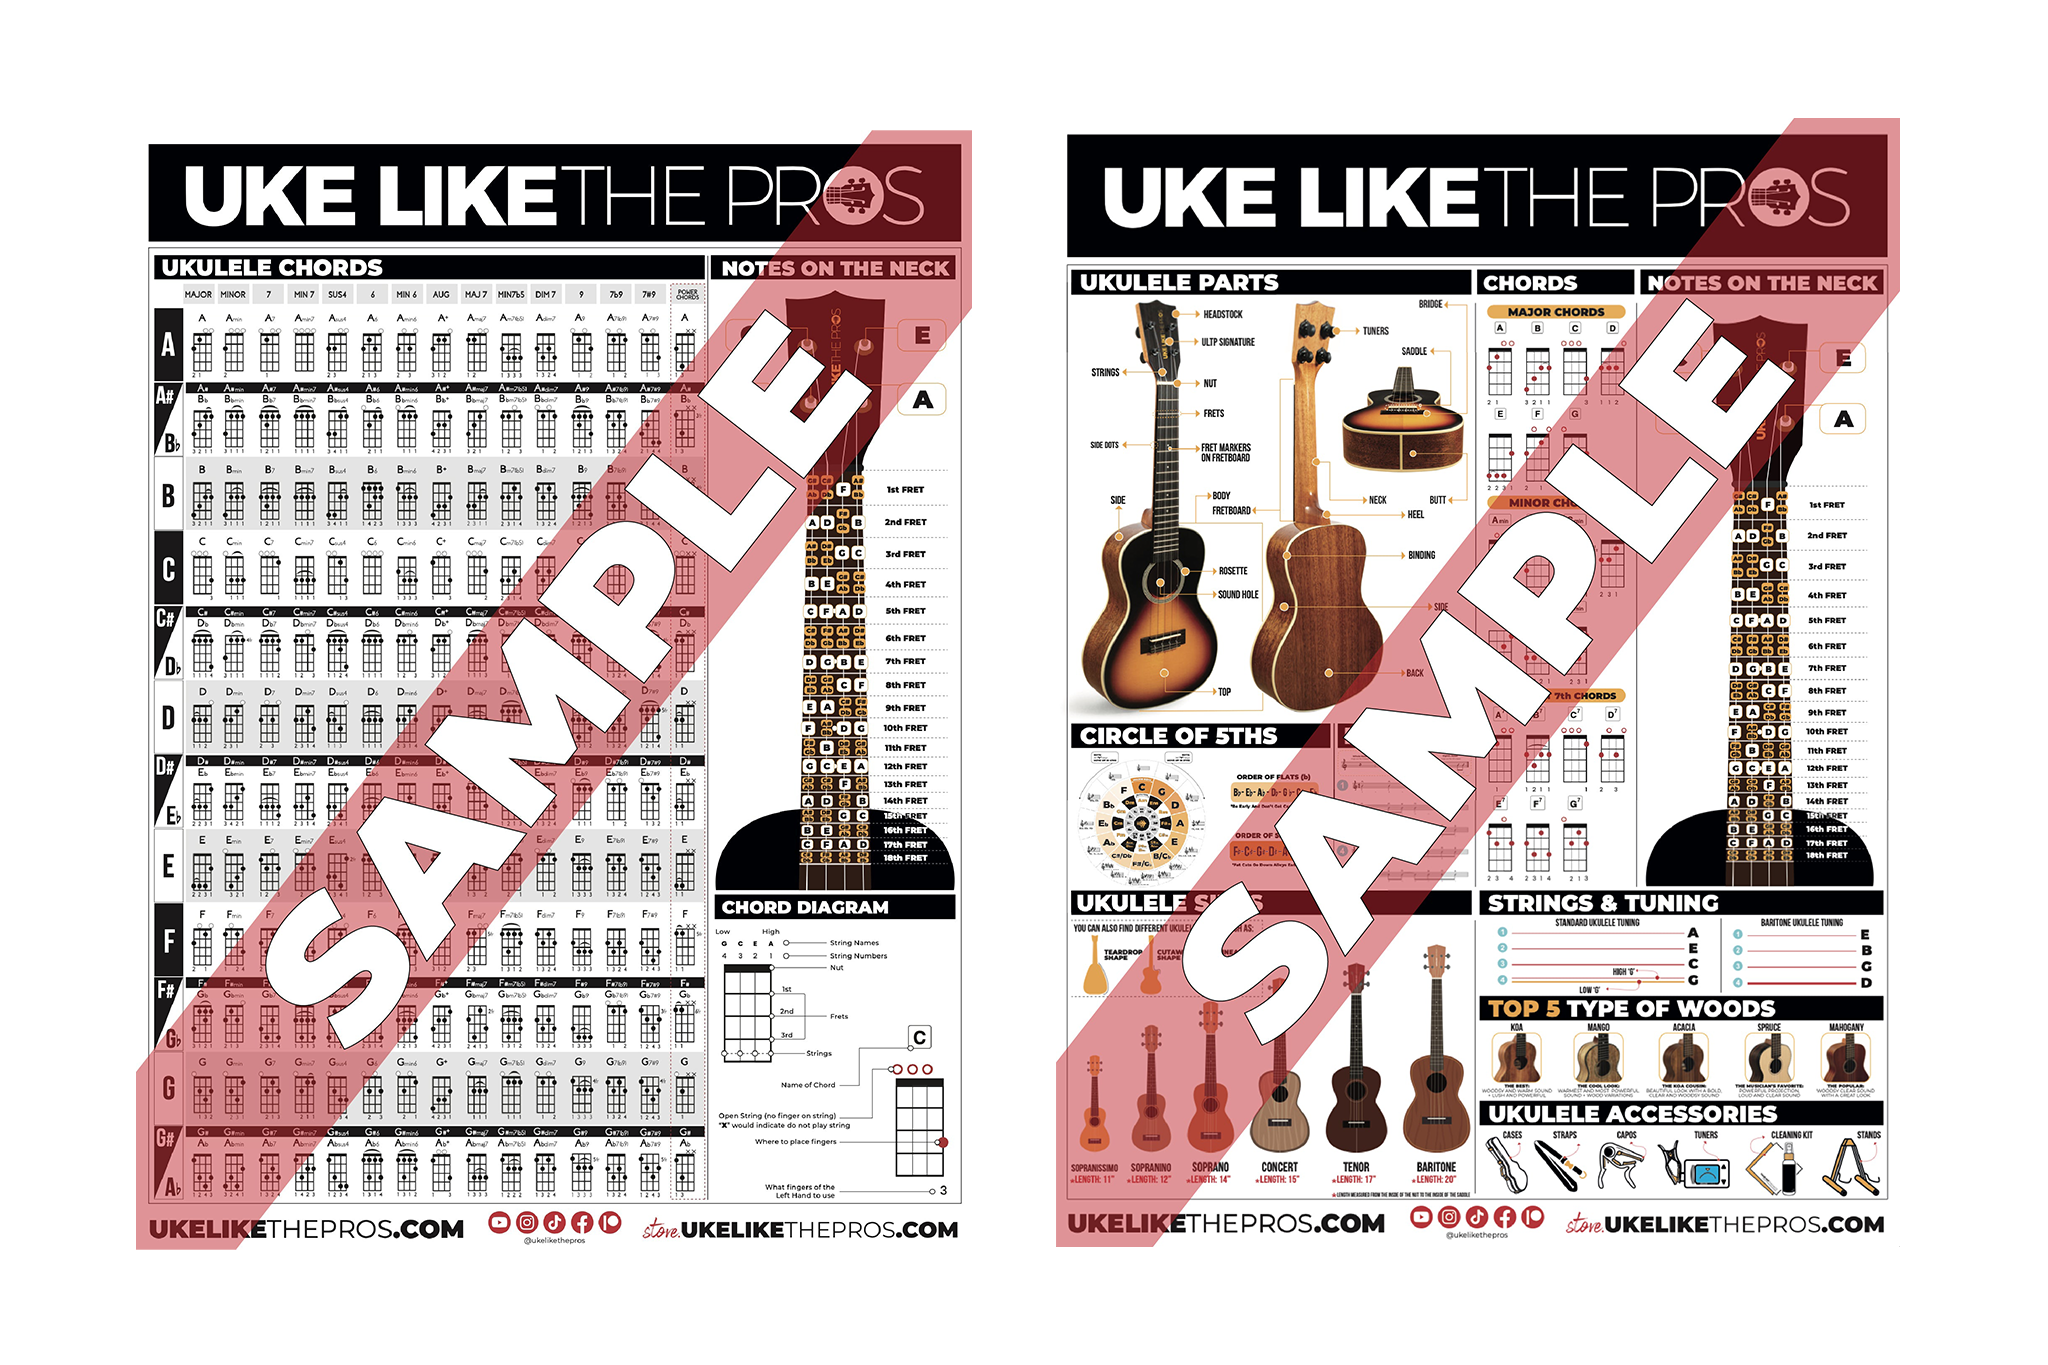 ALL ULTP Ukulele Posters! 2 posters for $7